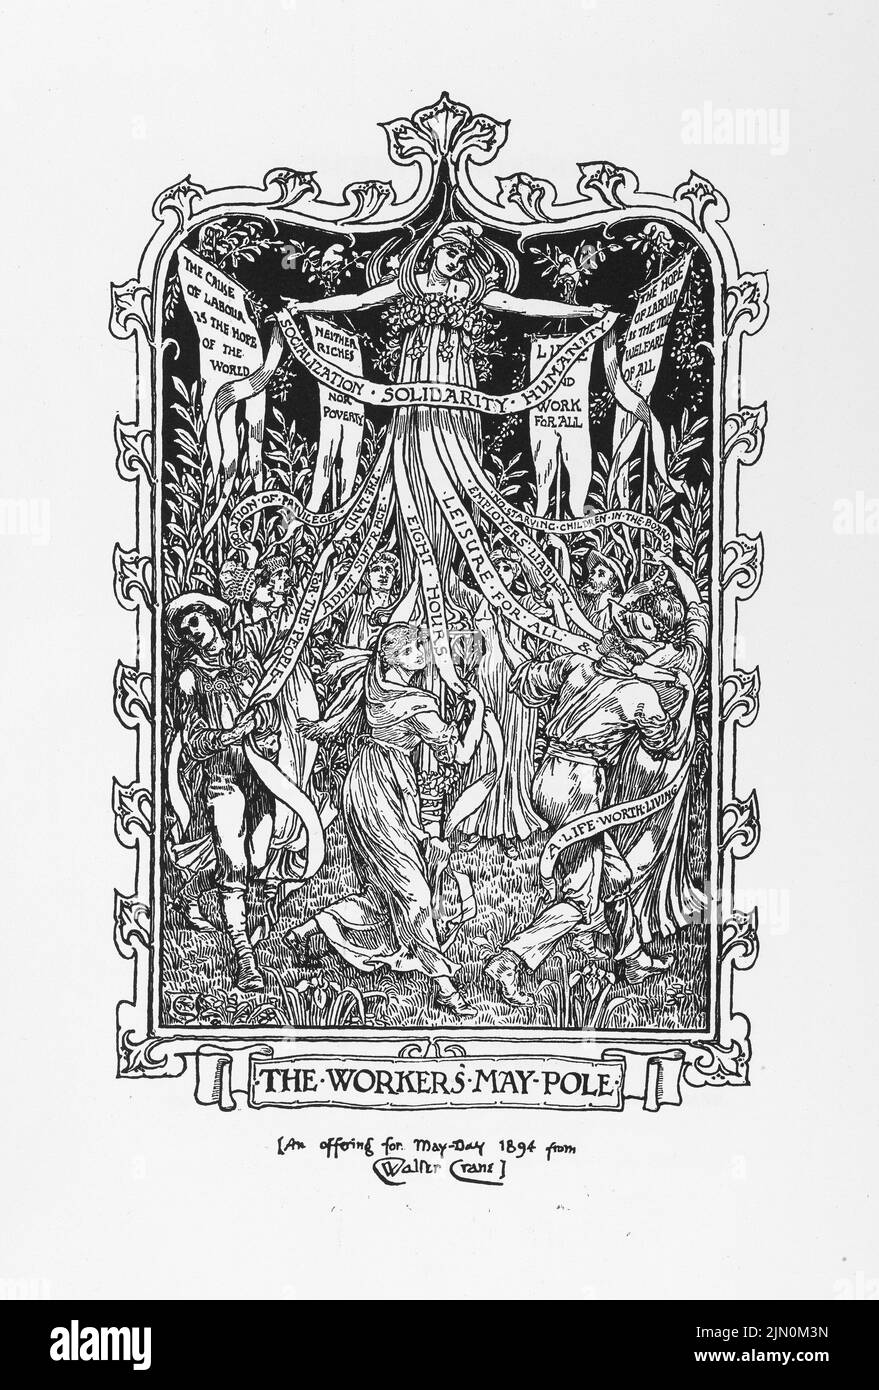 The Worker's May Pole. Illustration by Walter Crane from Cartoons for the Cause 1886-1896, International Socialist Workers. Stock Photo